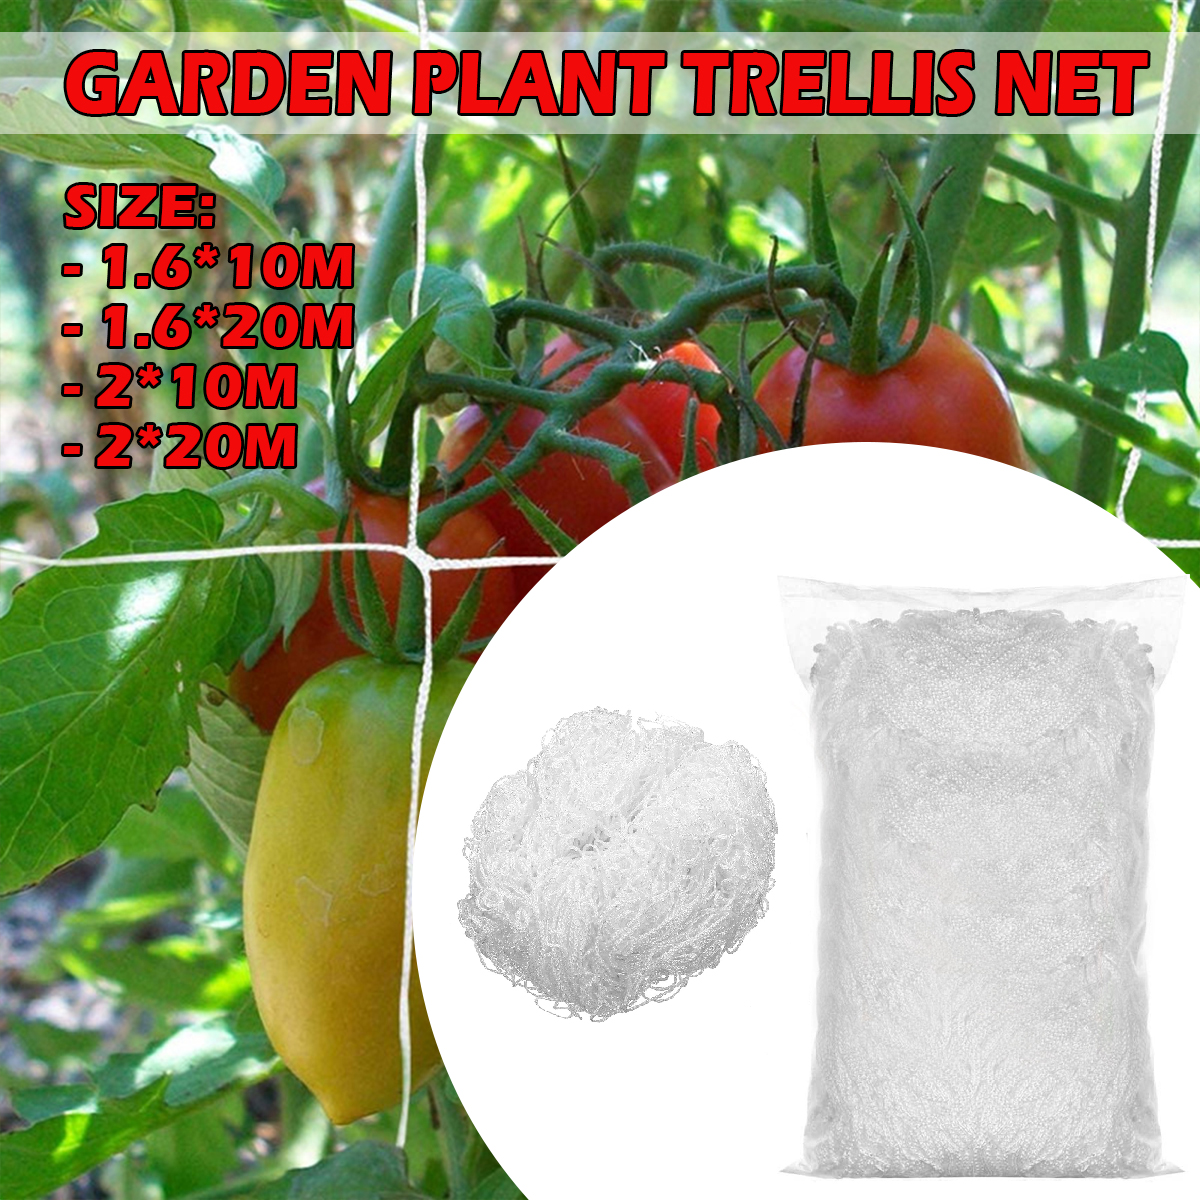 Polyester-Anti-Bird-Protection-Net-Garden-Plant-Protect-Net-Plants-Fruits-Flowers-Trees-Grow-Protect-1698135-1